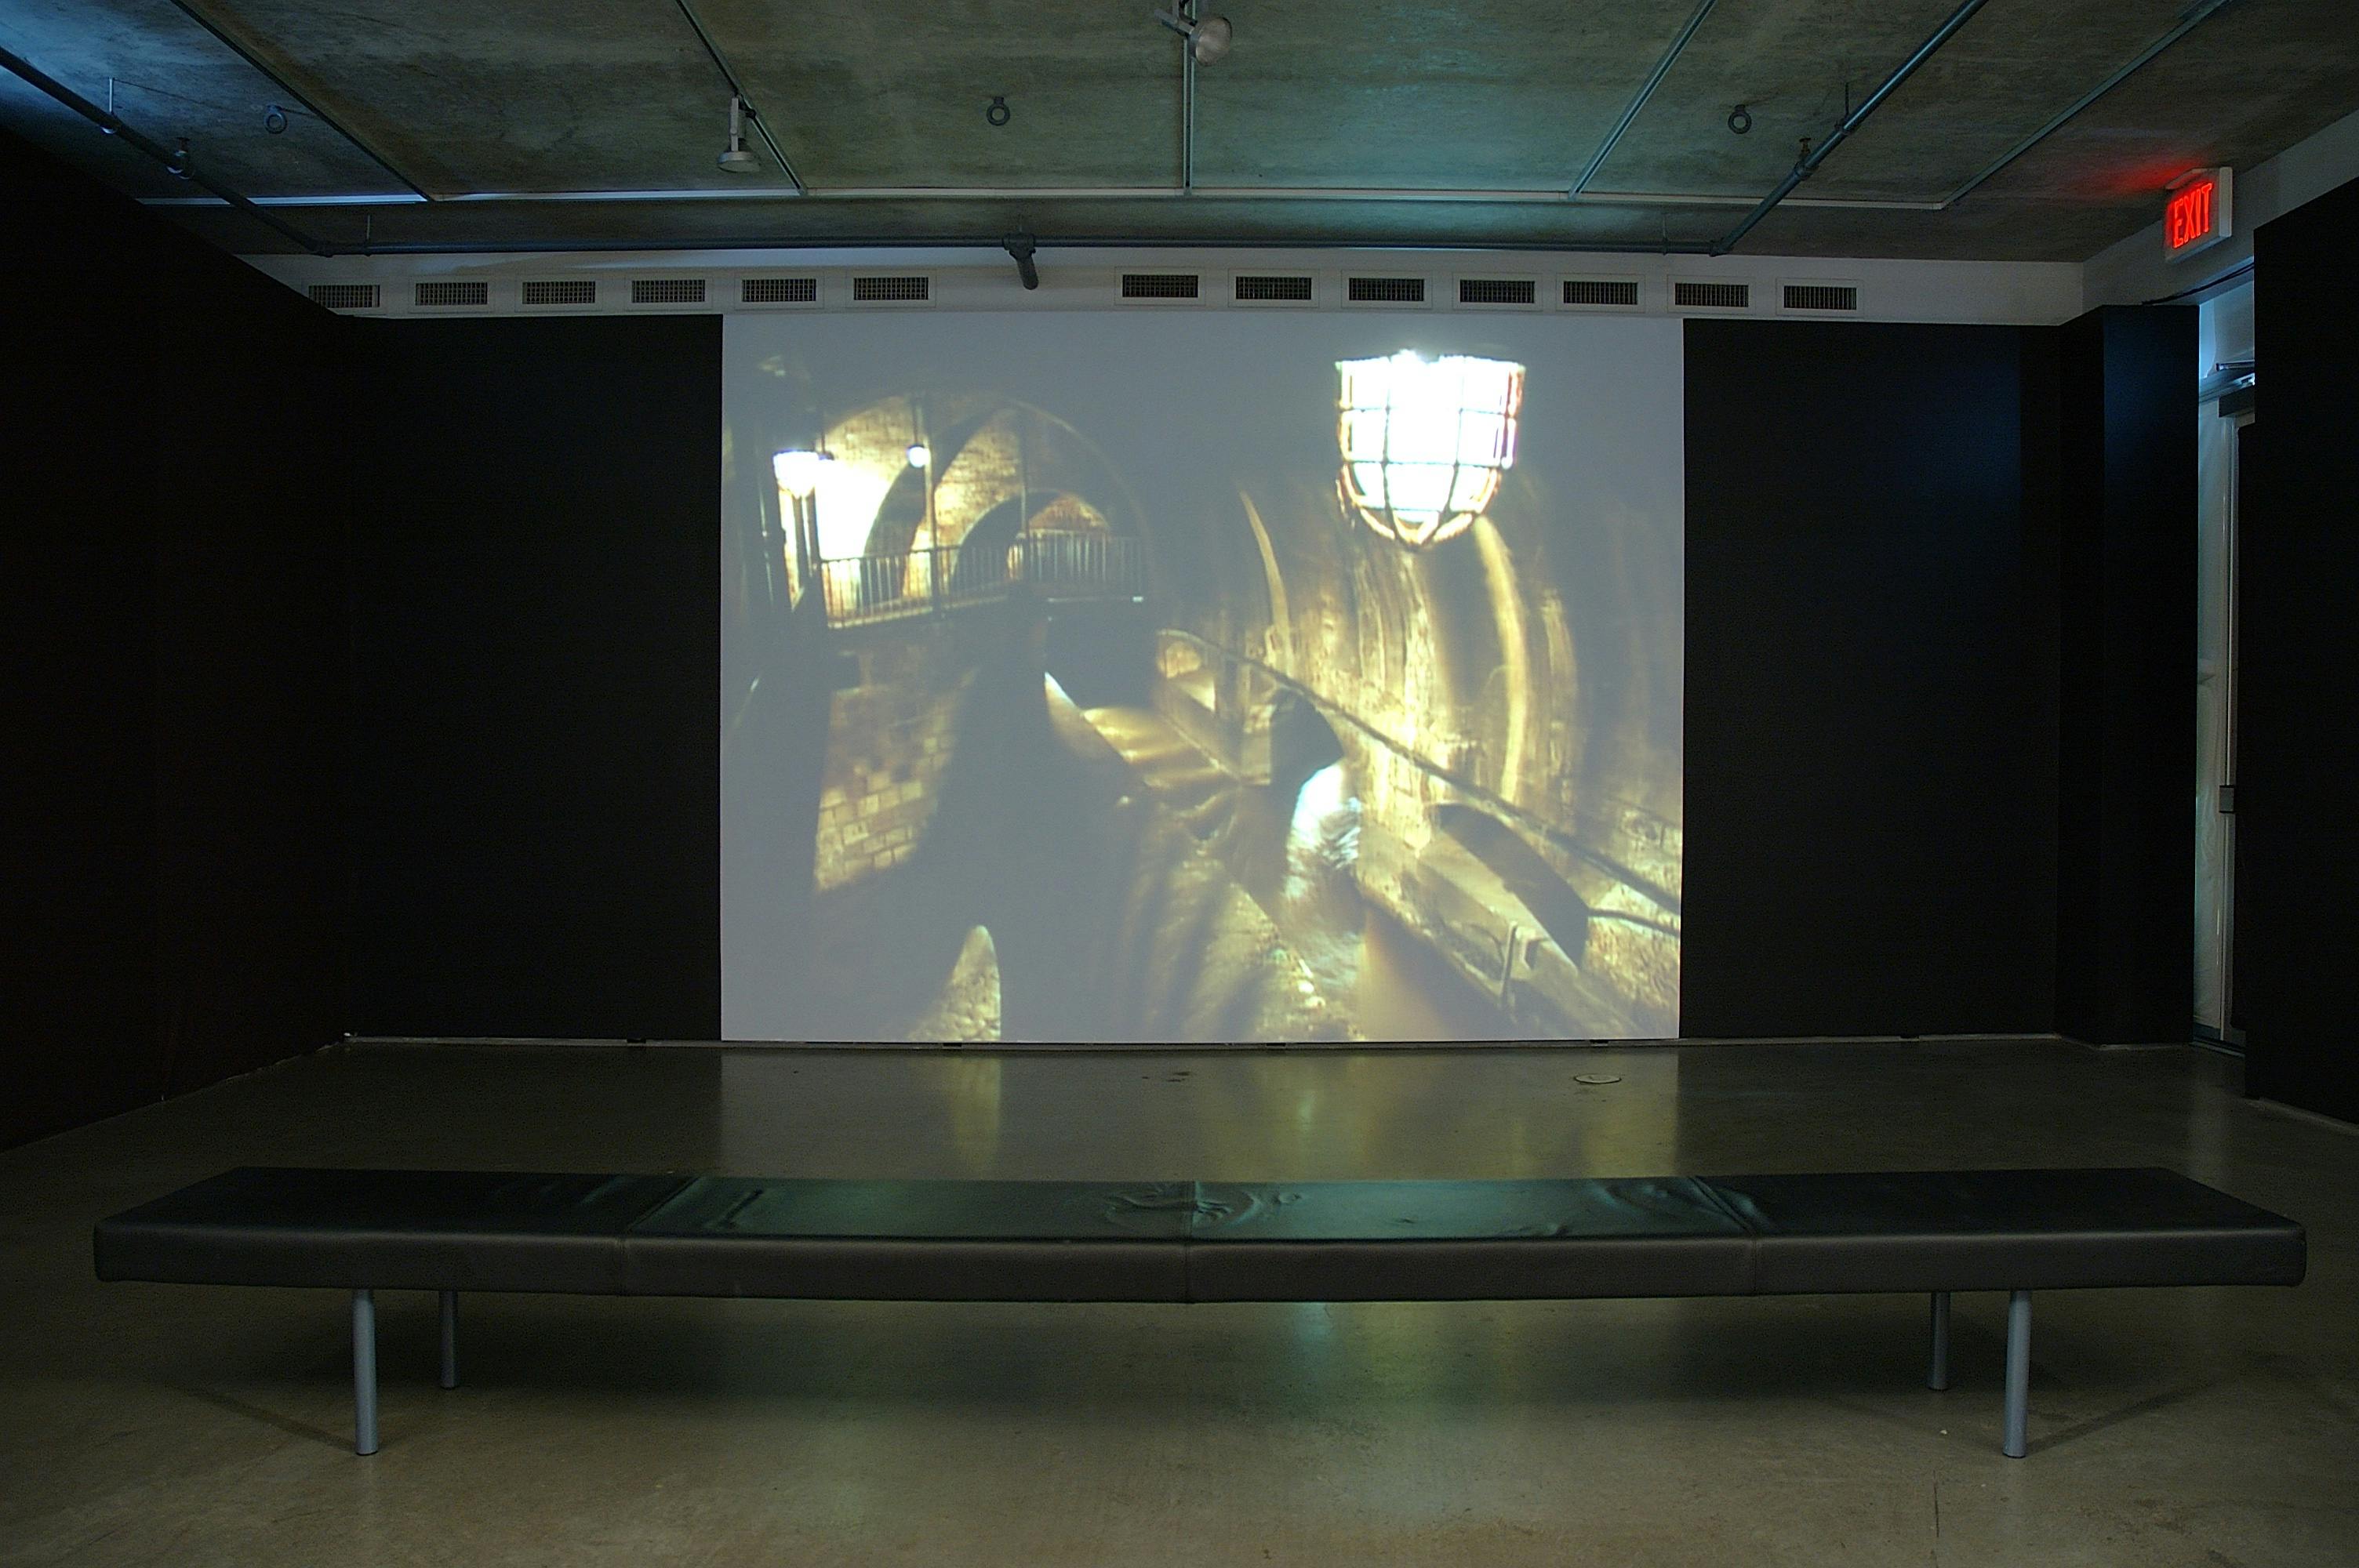 An installation image of a video projected on a wall in a dimly lighted gallery. The video shows an aerial view of a sewer.